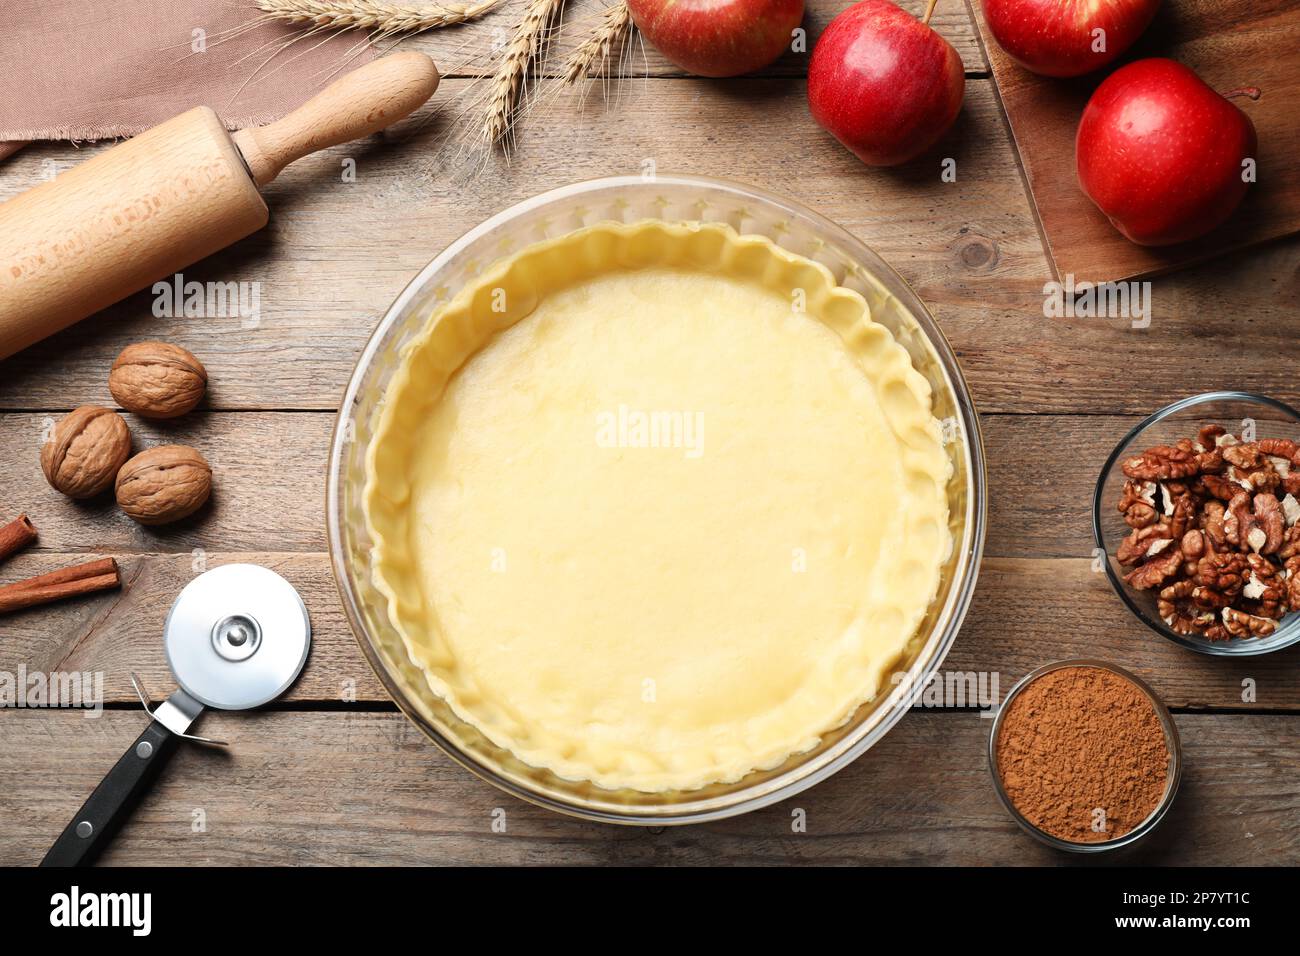 Flat lay composition with raw dough and ingredients for apple pie on wooden table Stock Photo